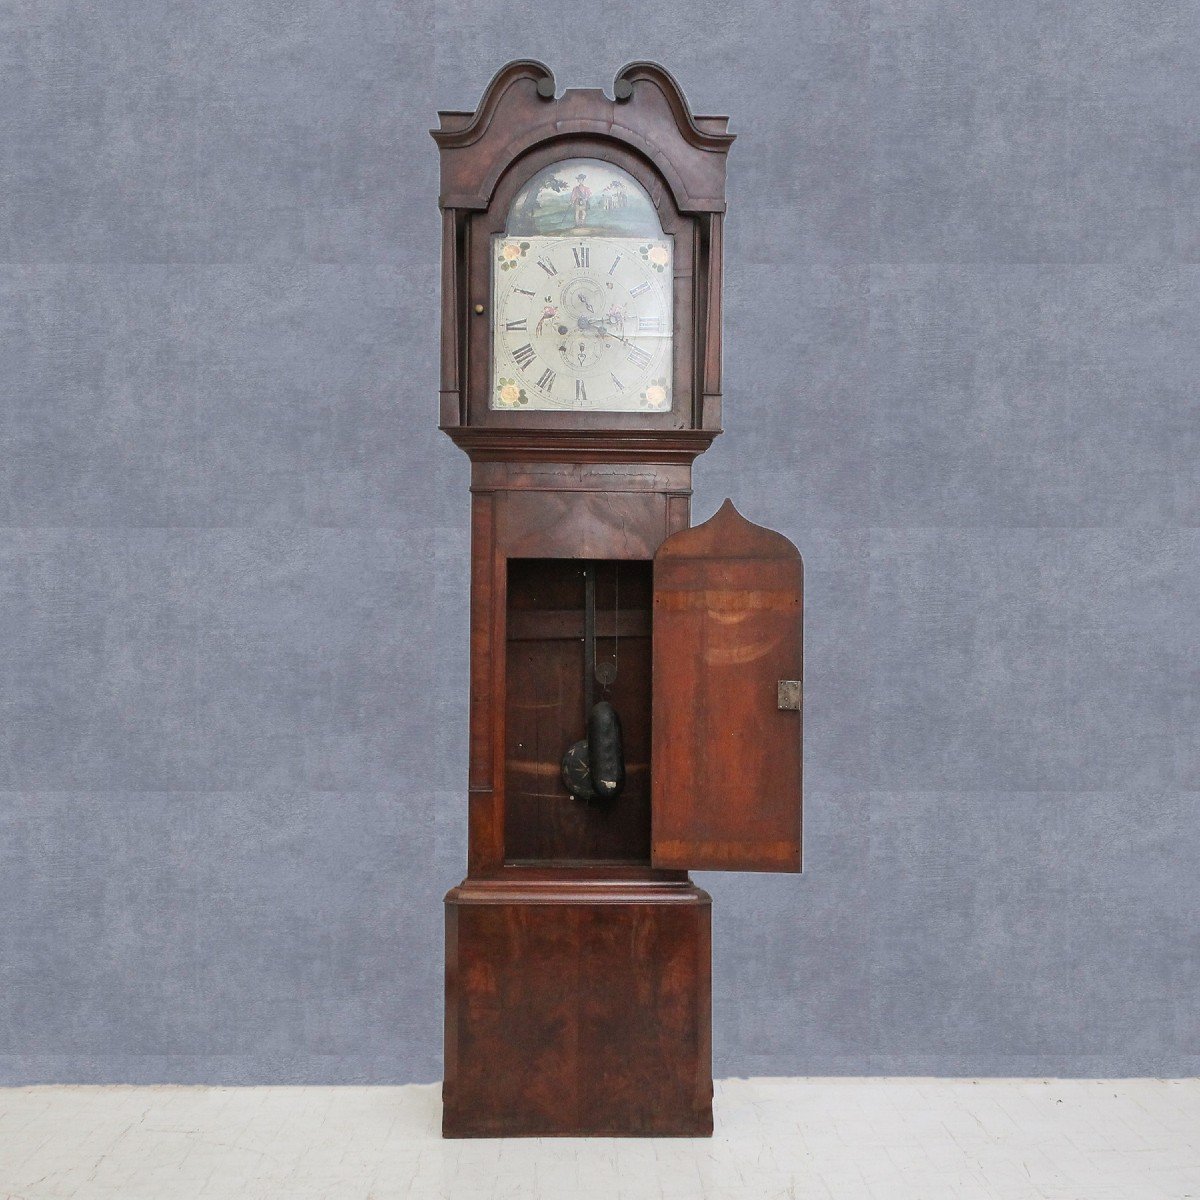 Large And Beautiful George III Style Mahogany Clock, Late 1700s Early 1800s.-photo-3